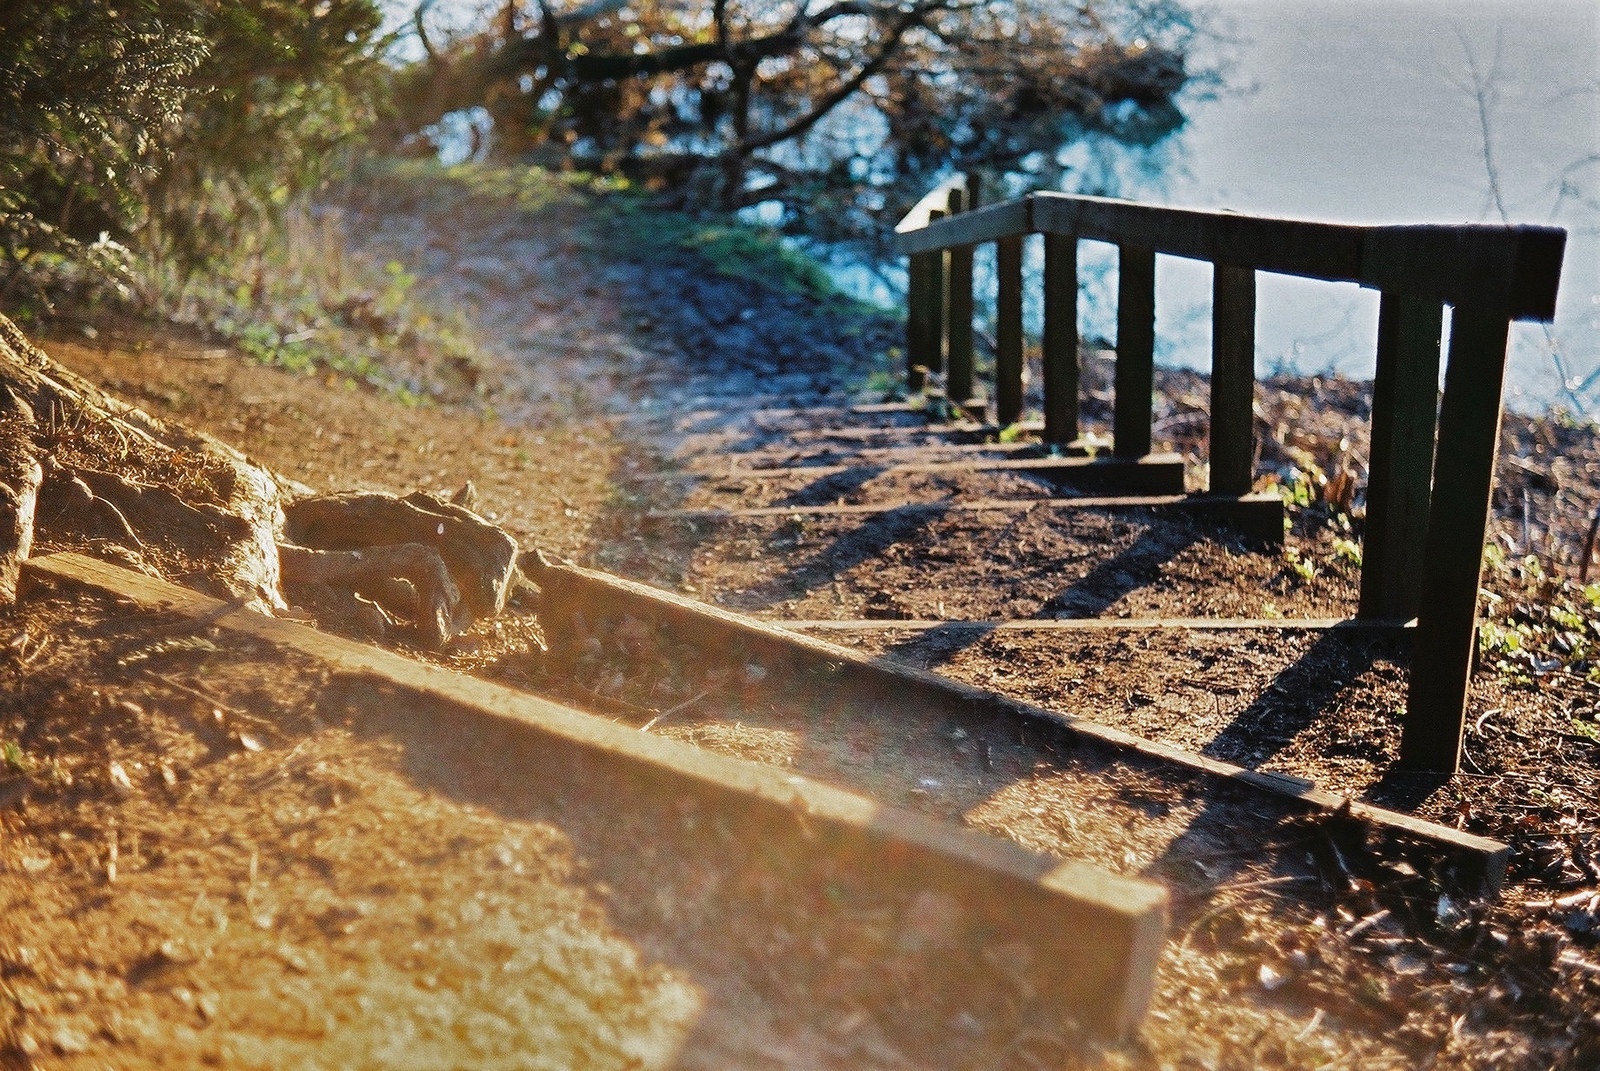 General 1600x1071 golden hour lens flare path stairs dirt